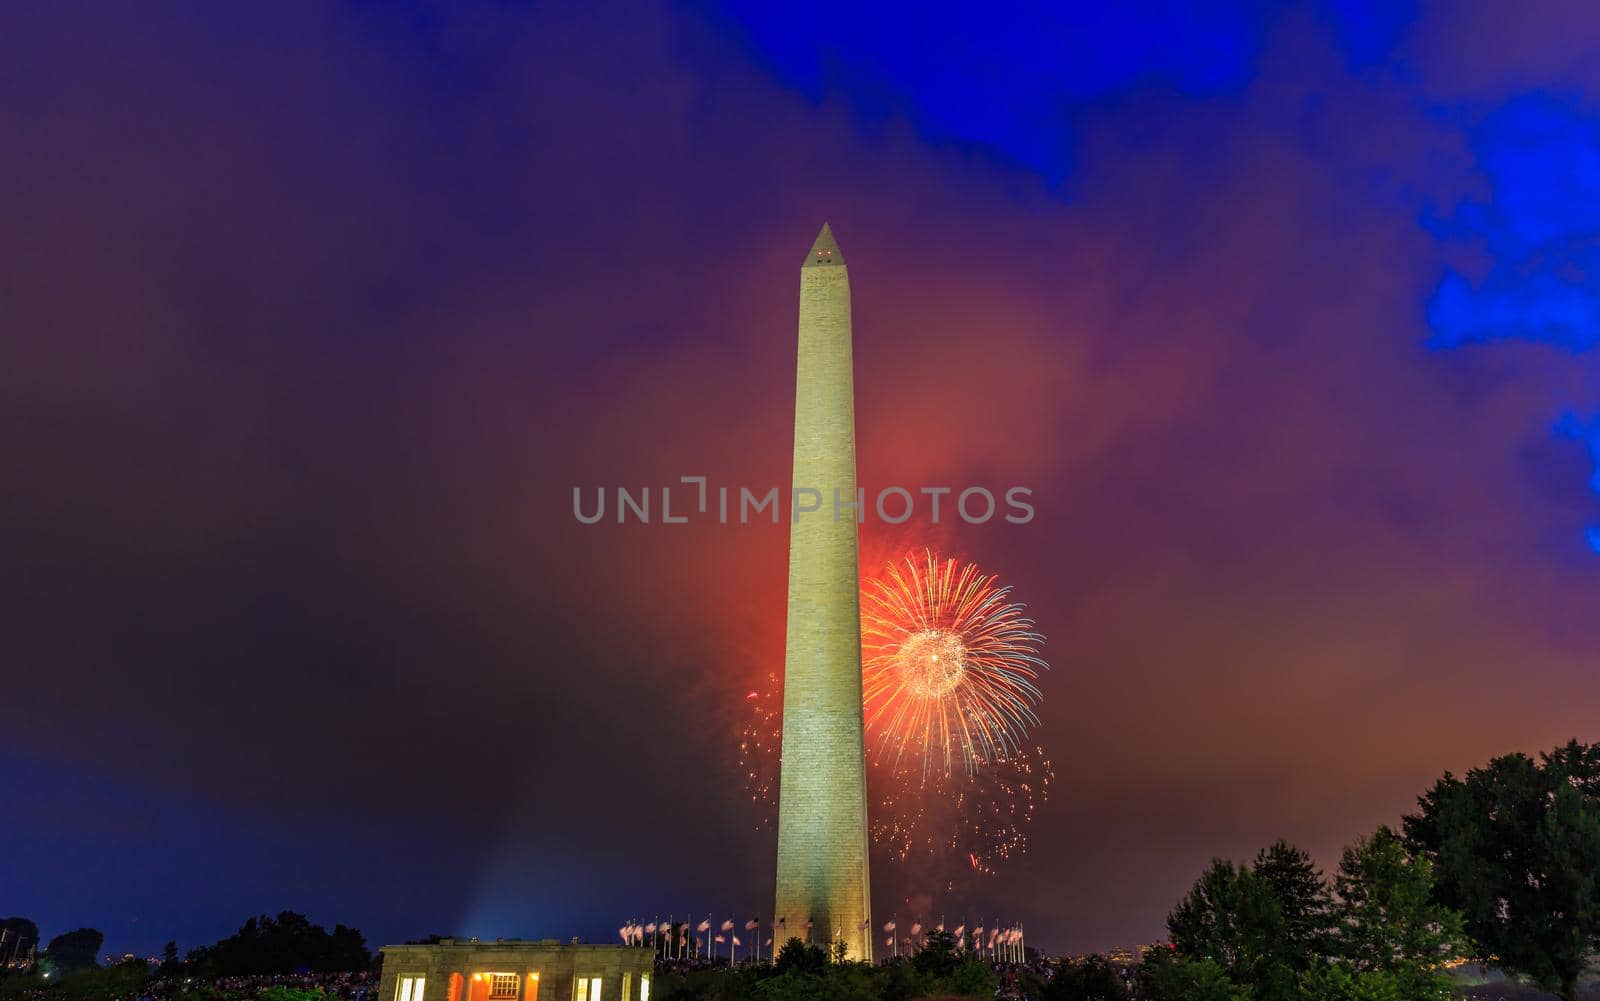 Washington DC, USA - July 04, 2015: Washington Monument stands tall with Fourth of July Fireworks in background.